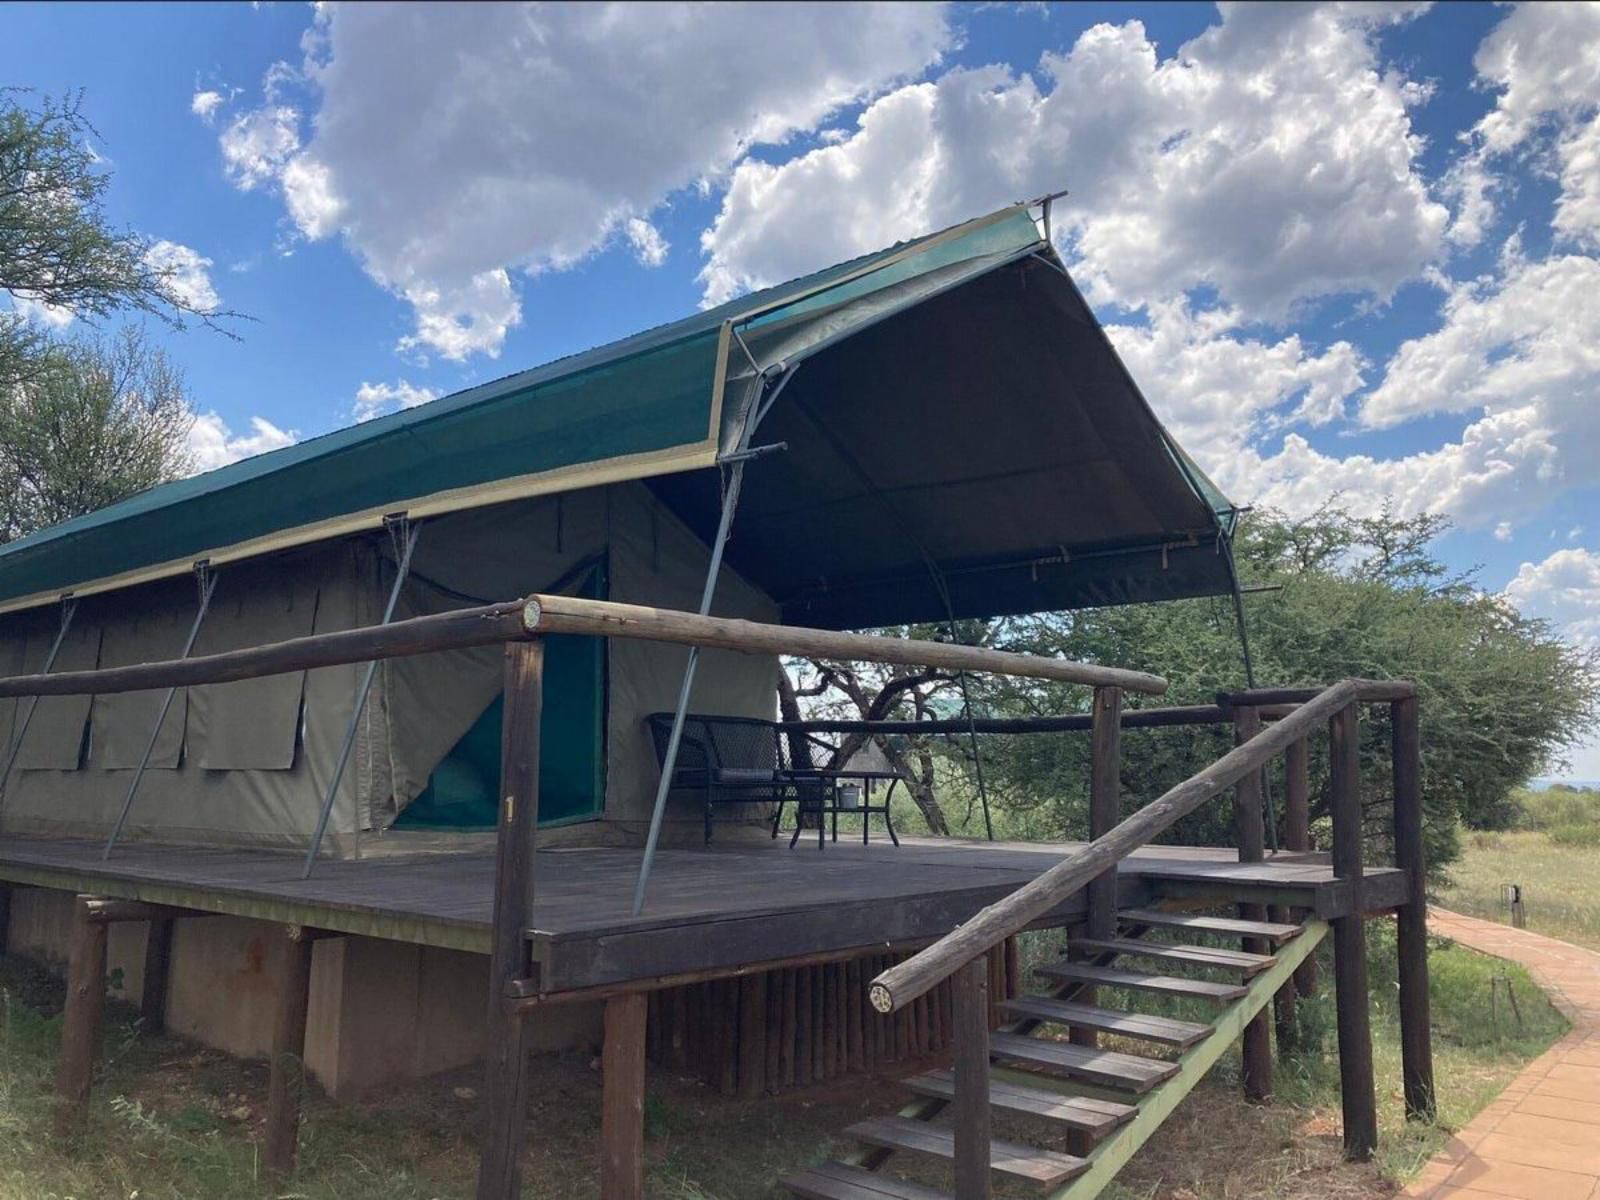 Mattanu Private Game Reserve Barkly West Northern Cape South Africa Tent, Architecture